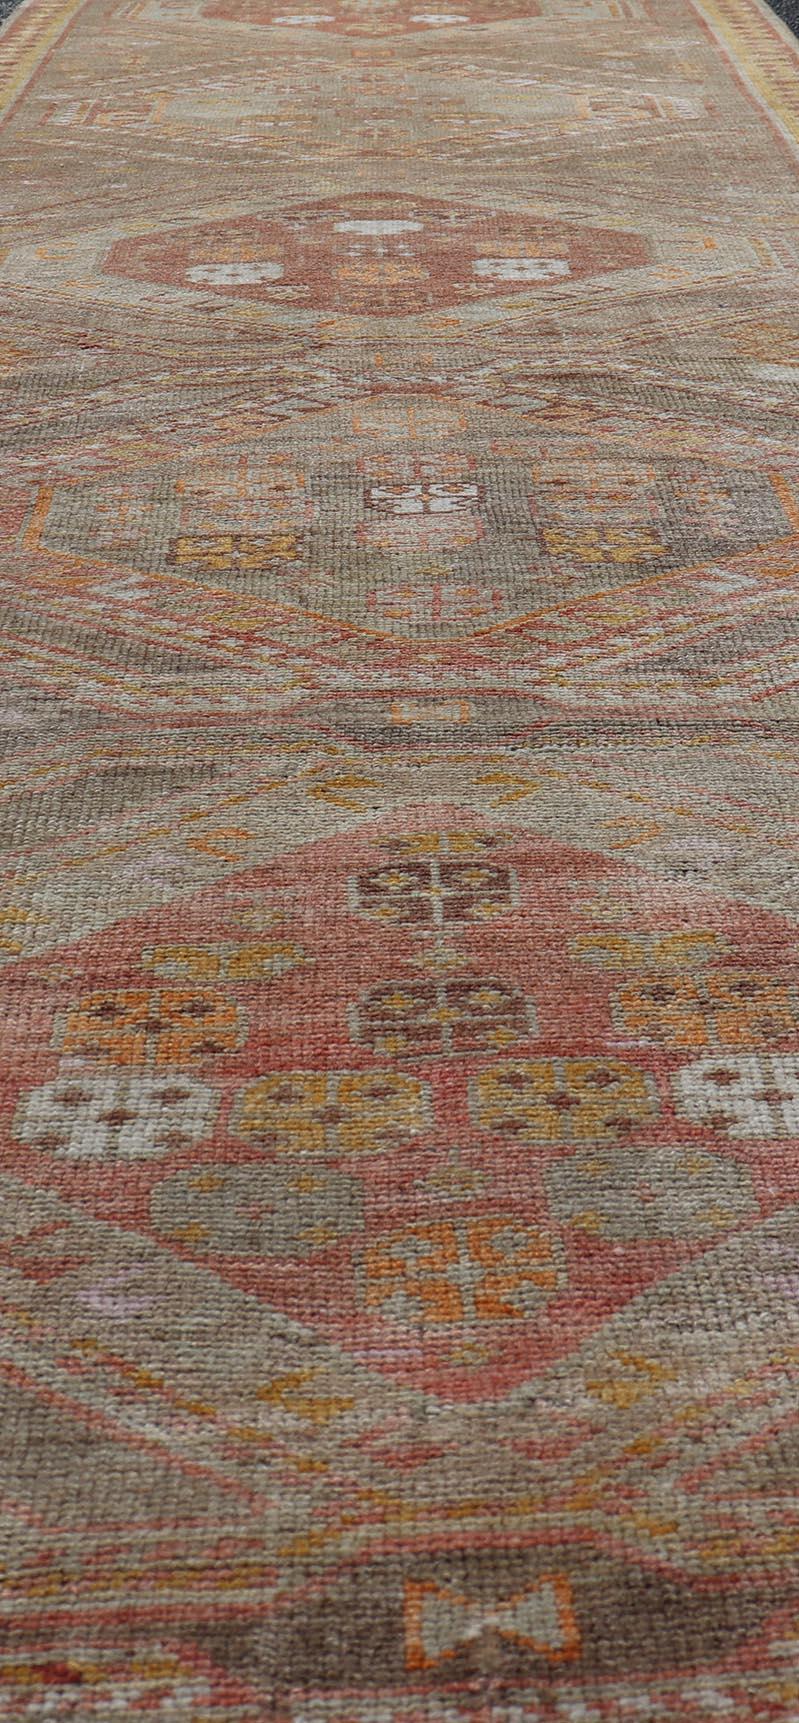 Vintage Turkish Oushak Runner with Tribal Medallions in Brown's, Yellow, and Red For Sale 3